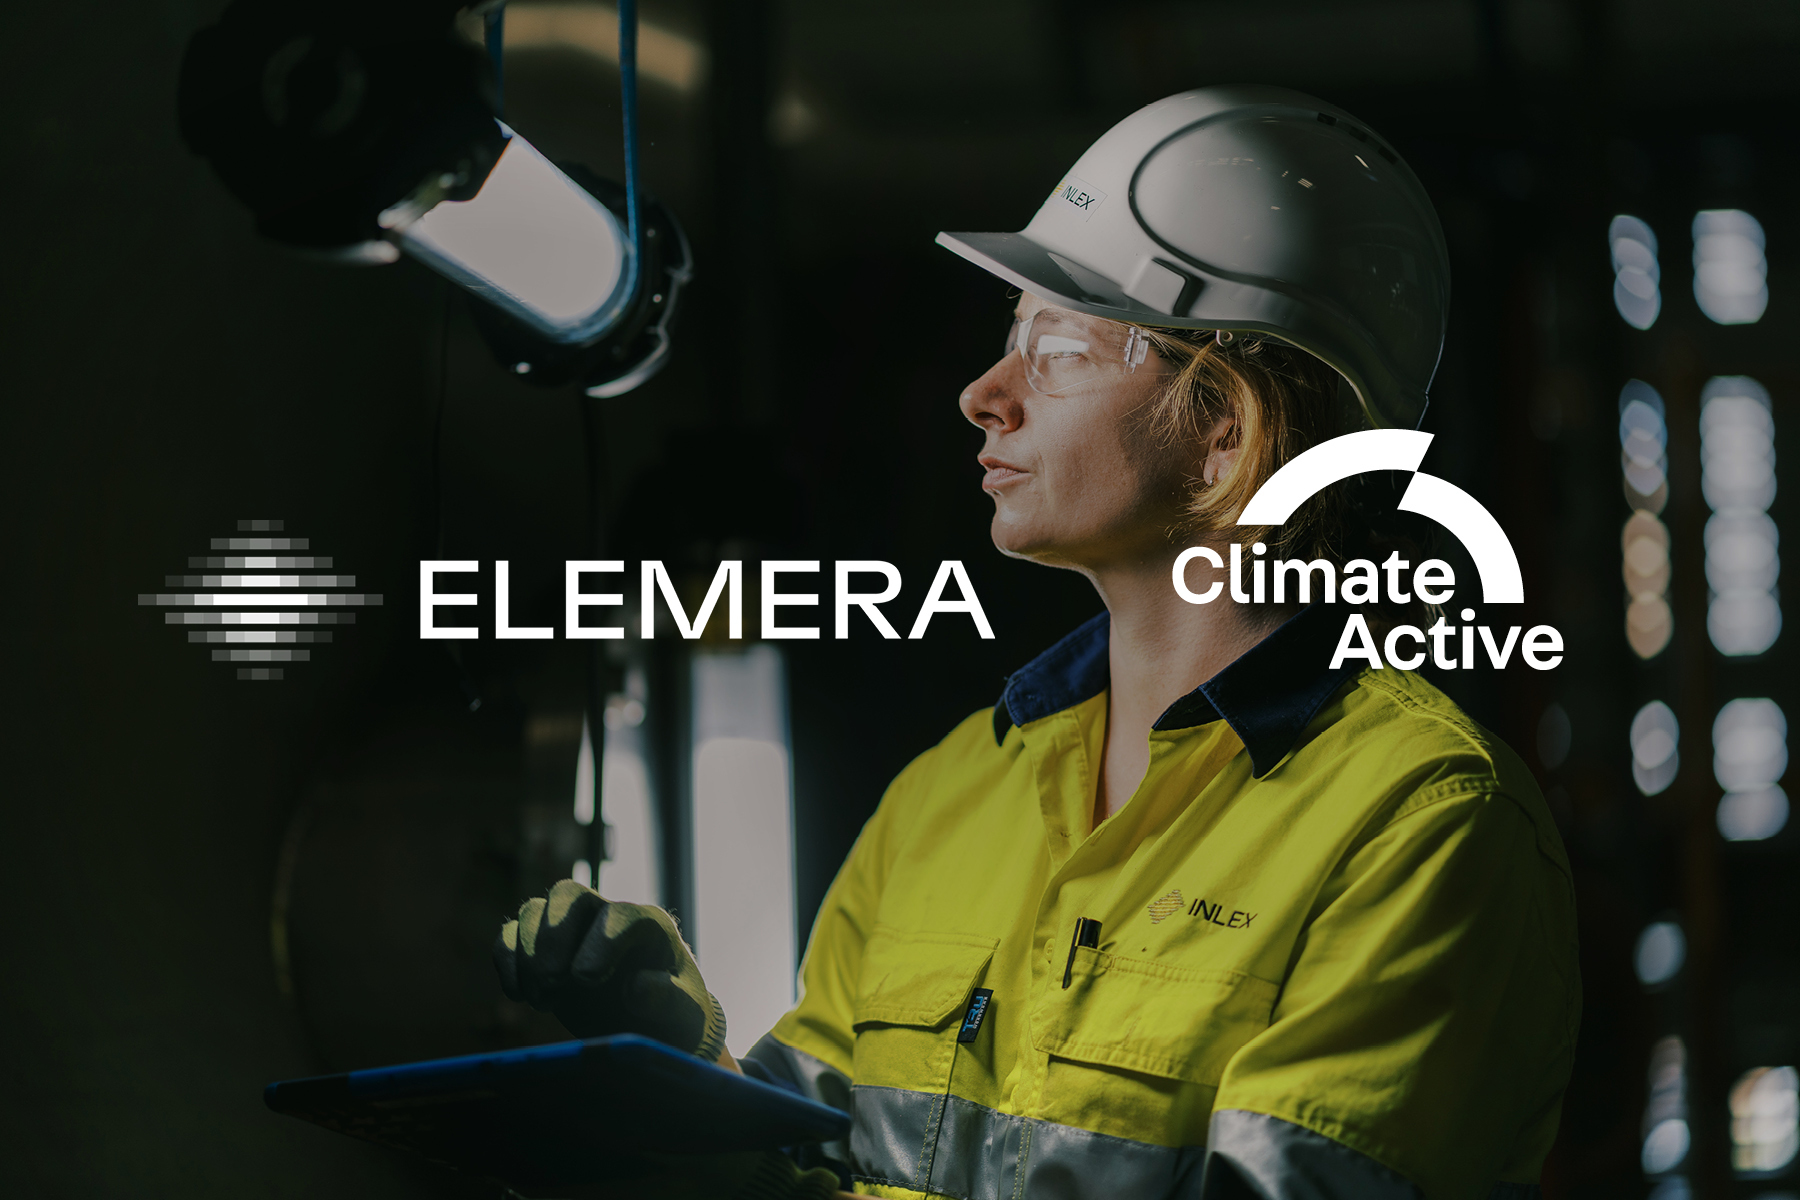 Elemera logo and Climate Active logo over a photo of a female engineer in high vis in a workshop.